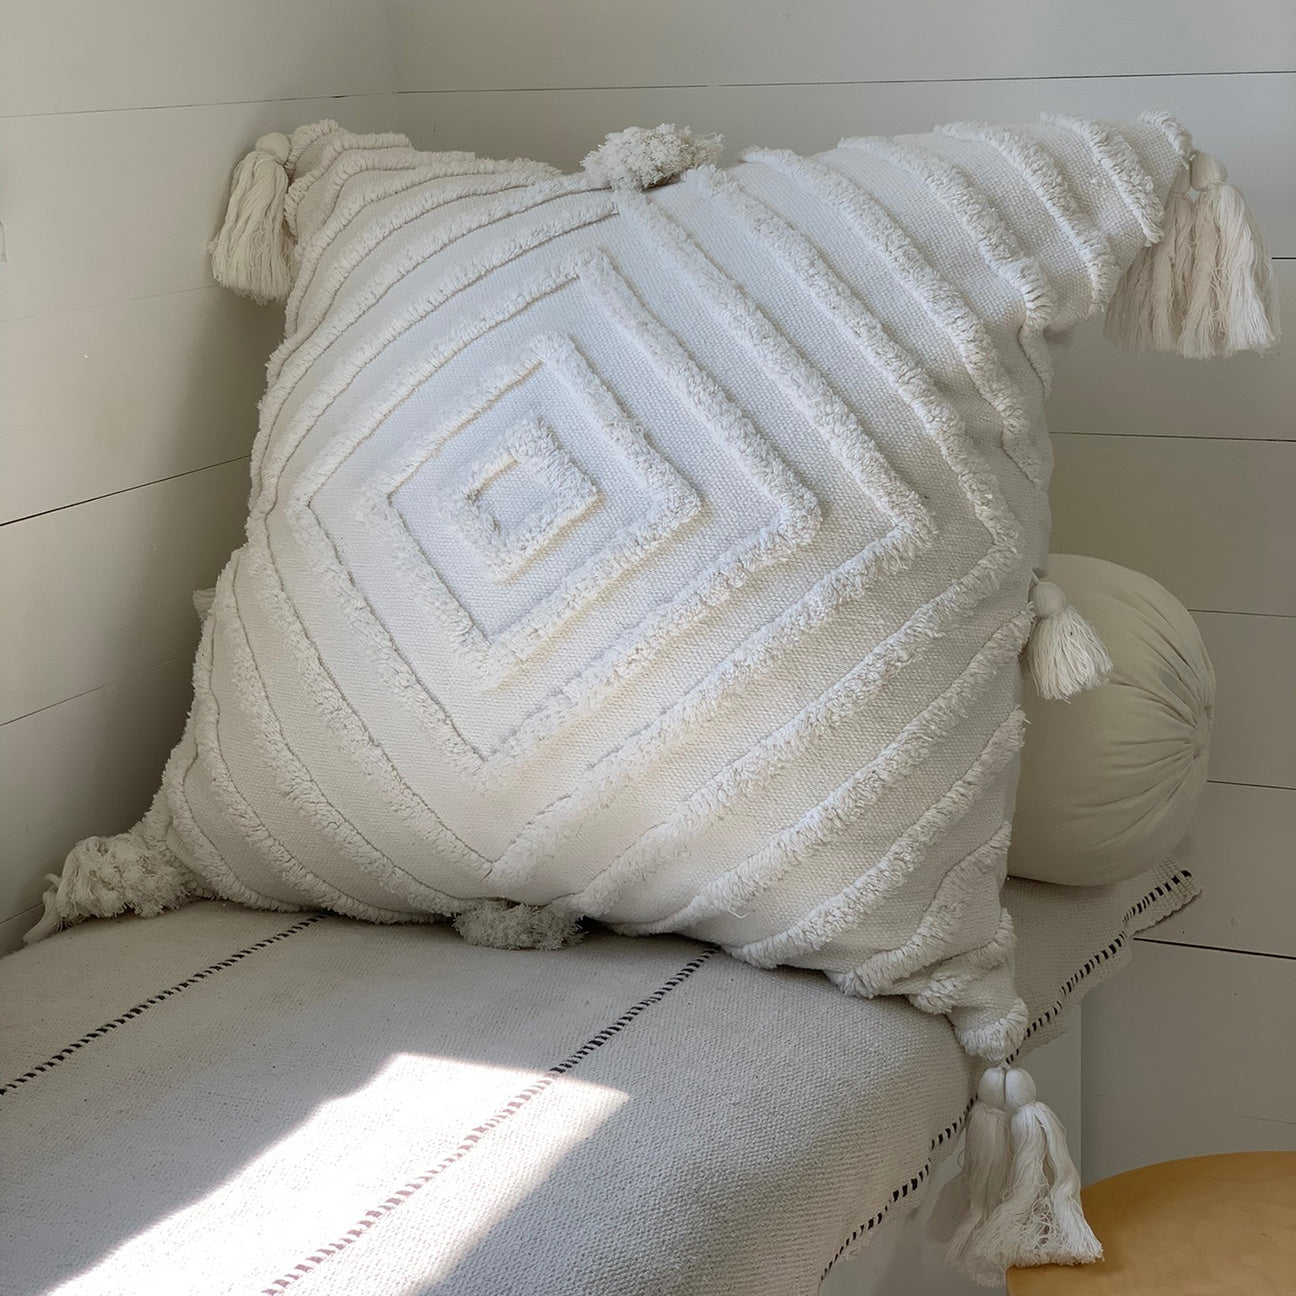 Image of M+A NYC Stella Tufted and Hand Loomed Cotton Pillow in the color Kora, shown on a daybed.